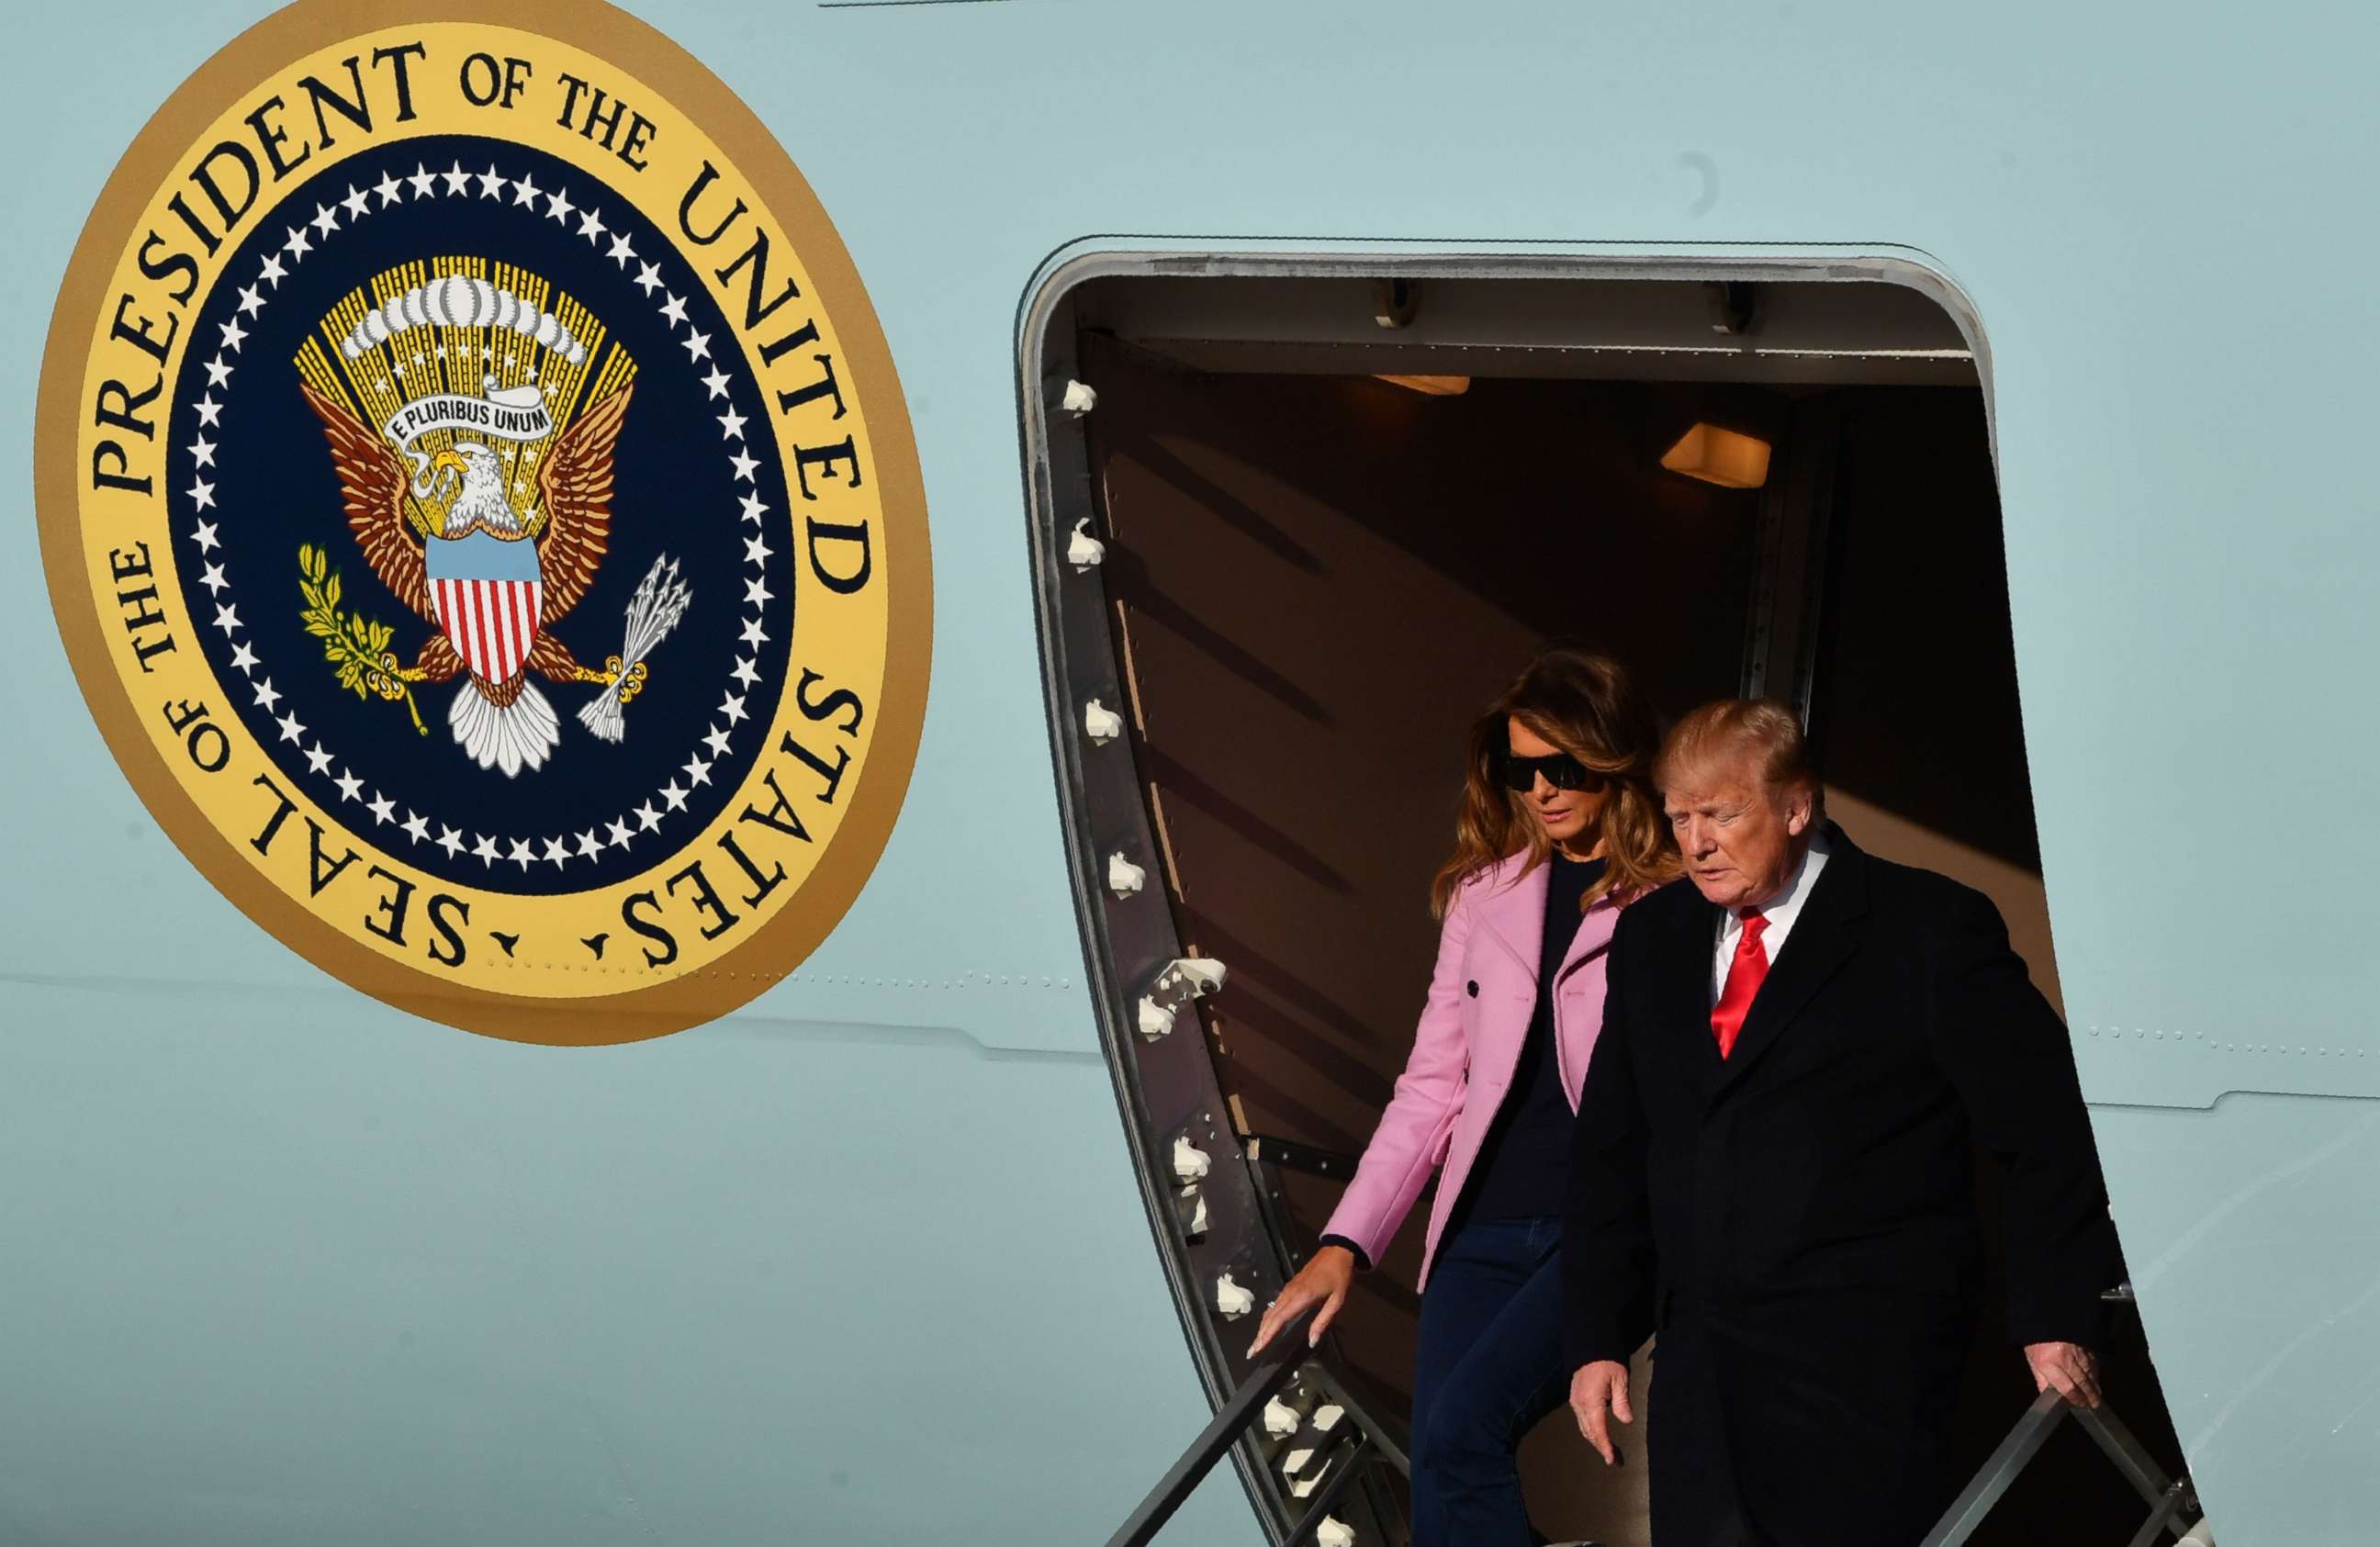 PHOTO: President Donald Trump and first lady Melania Trump step off Air Force One upon arrival at Andrews Air Force Base in Maryland.